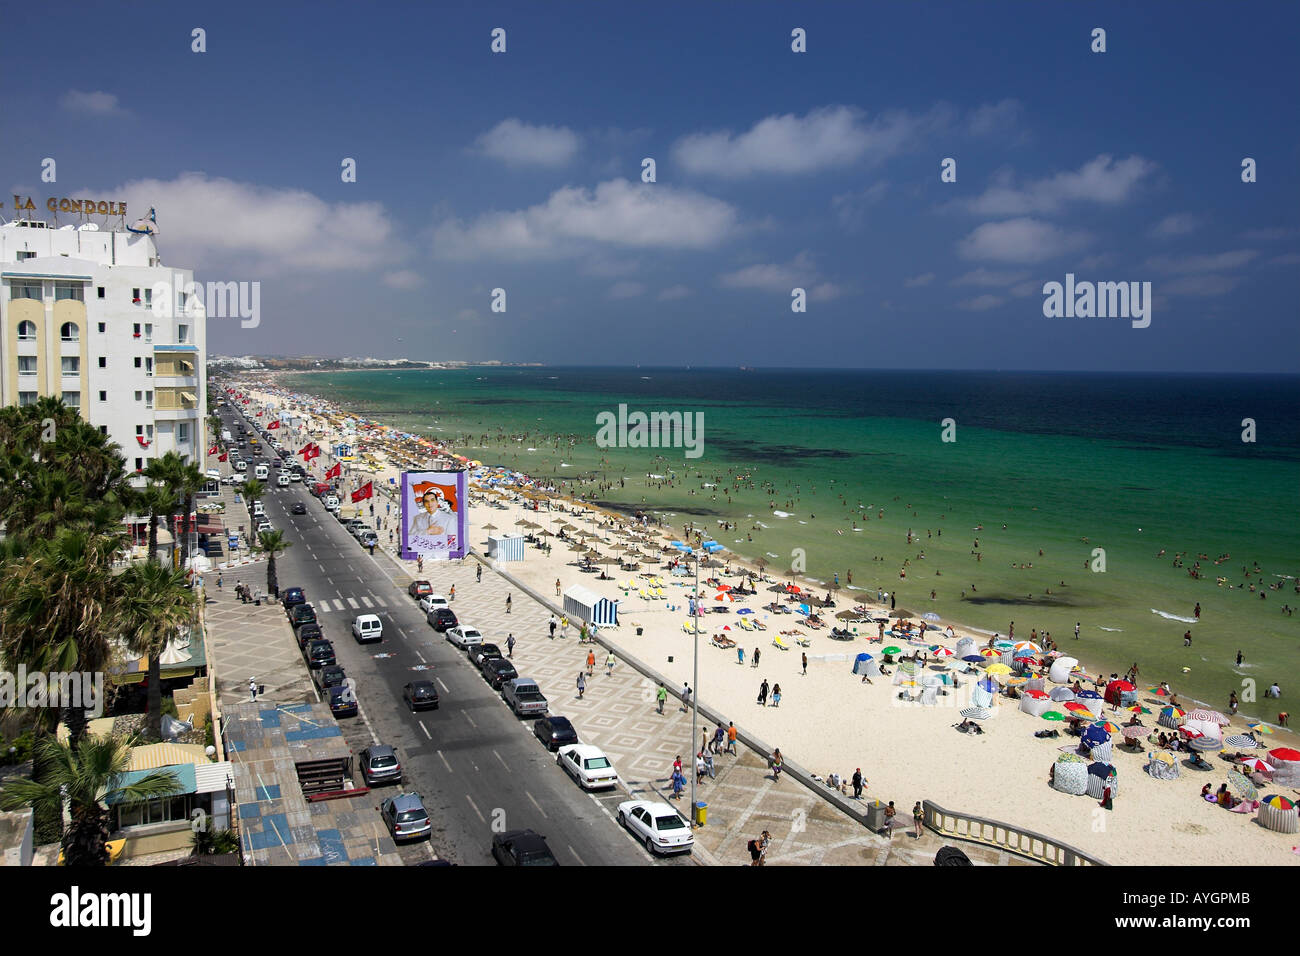 Popular Boujaffar Beach and promenade at Sousse Tunisia wiith one of the ubiquitous banner images of President Ben Ali Stock Photo